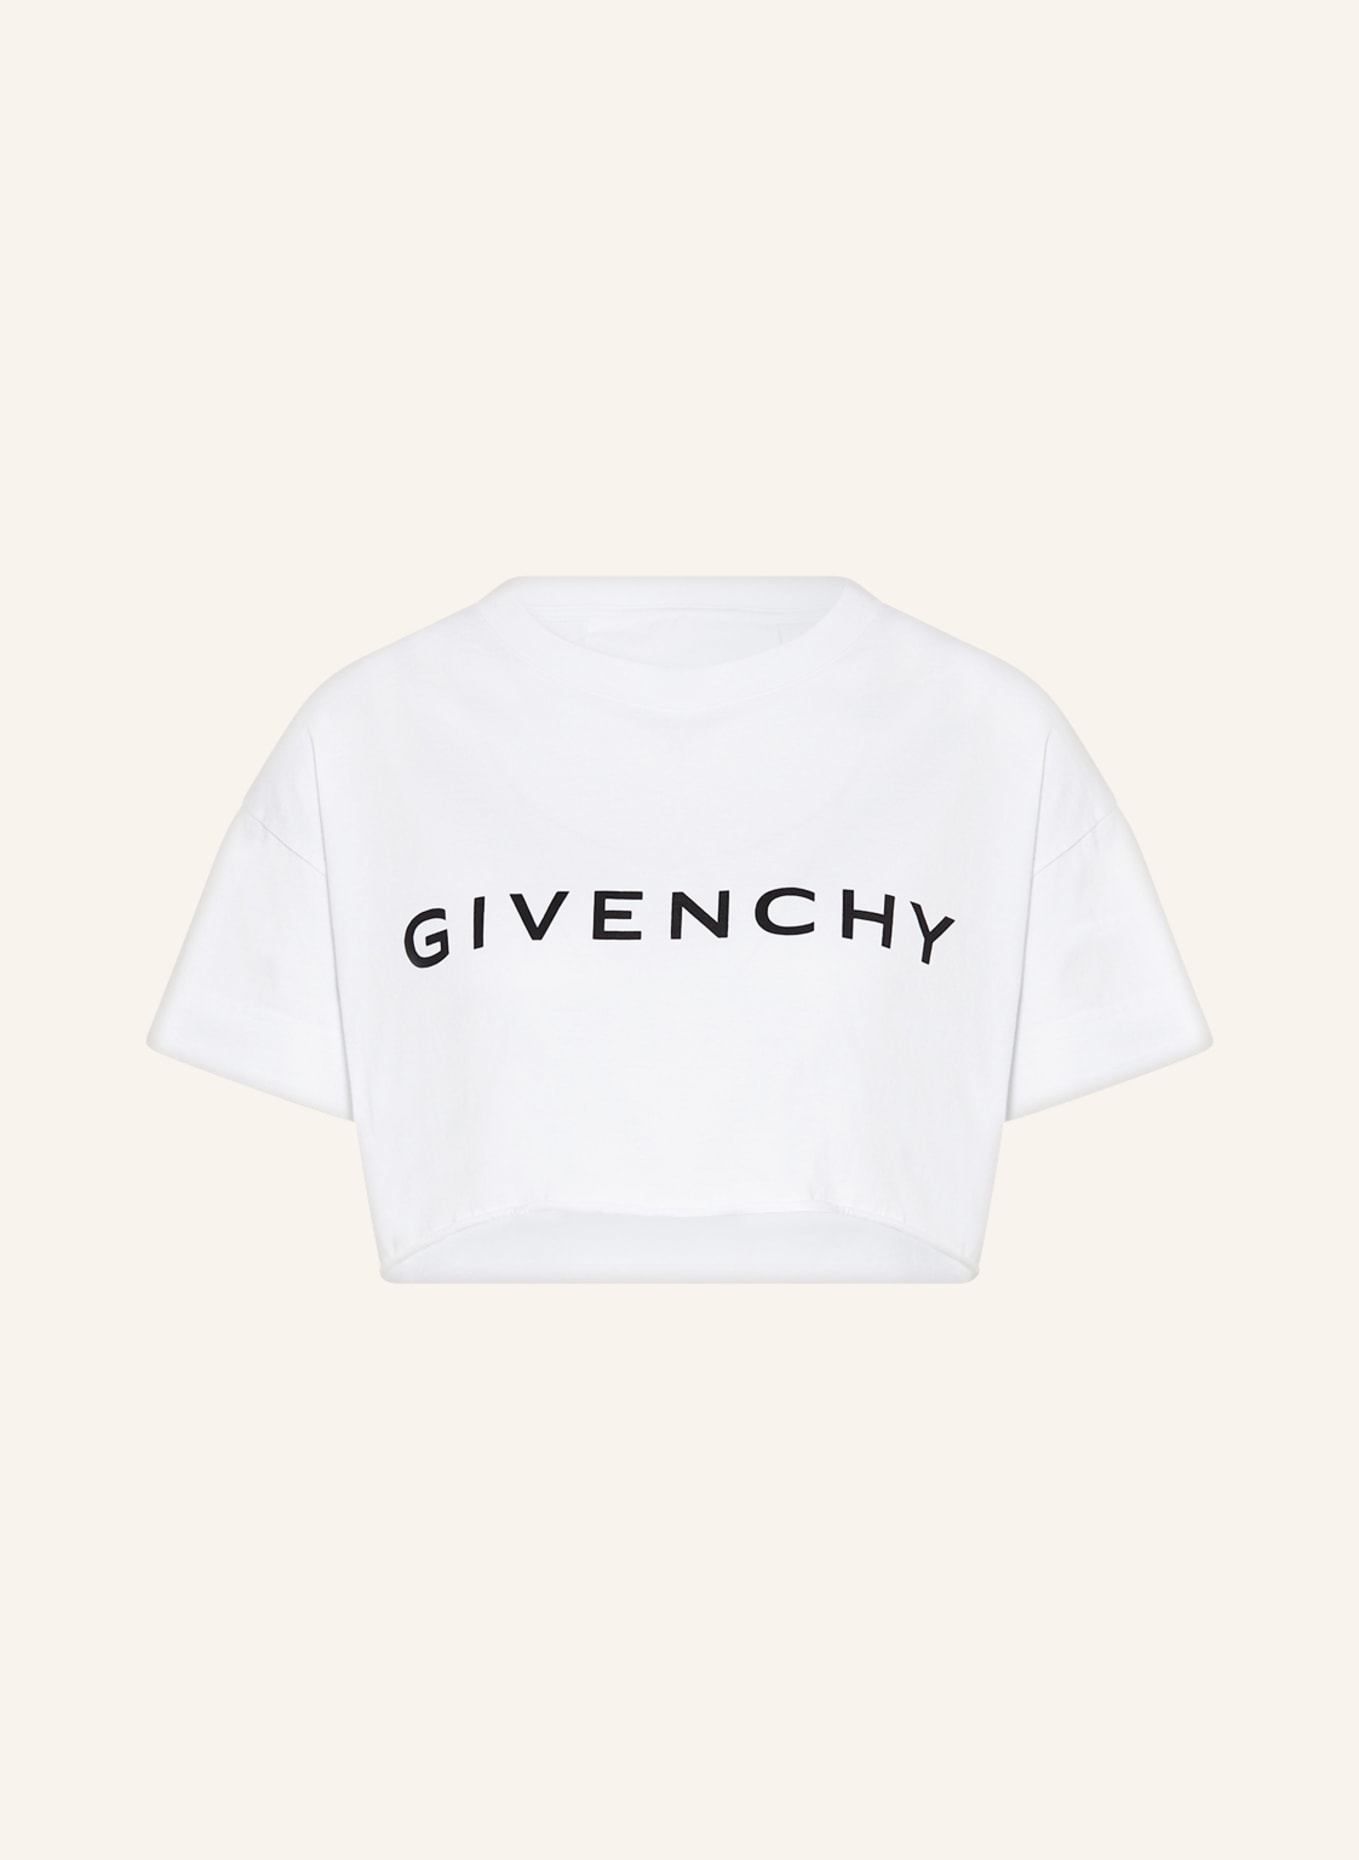 GIVENCHY Cropped-Shirt, Farbe: WEISS (Bild 1)